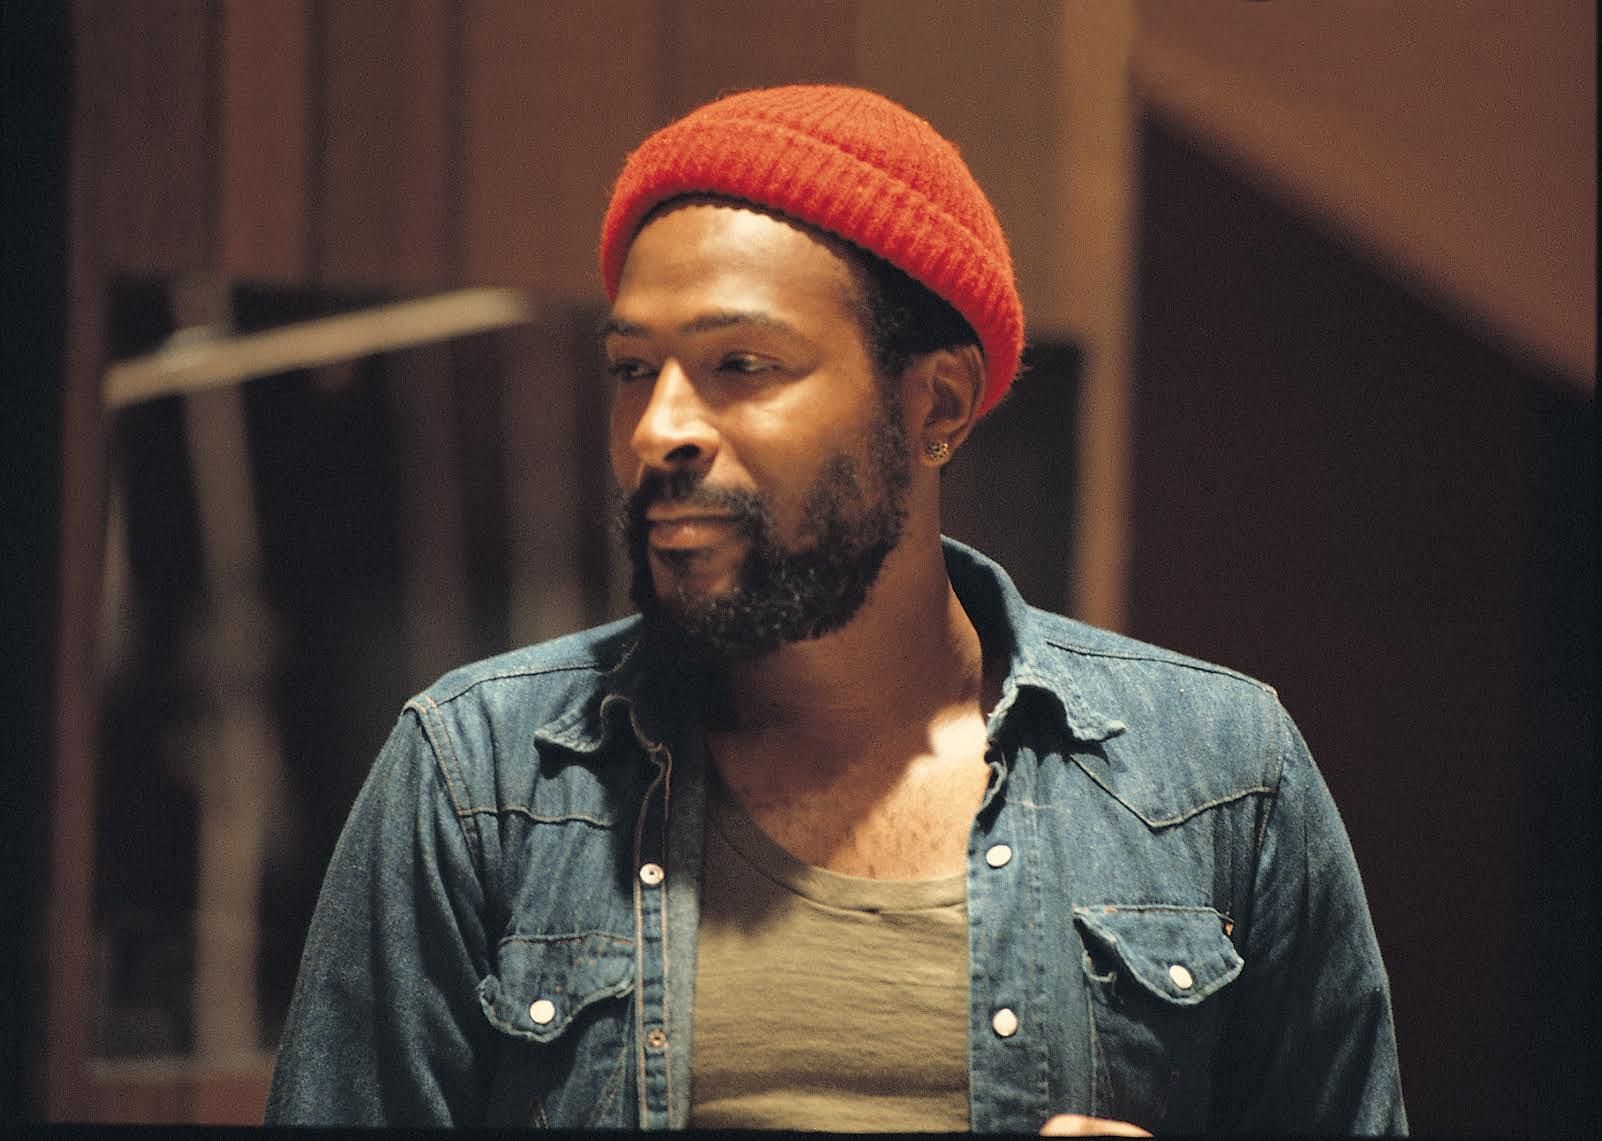 Marvin Gaye [Photo Source: Songwriters Hall of Fame]